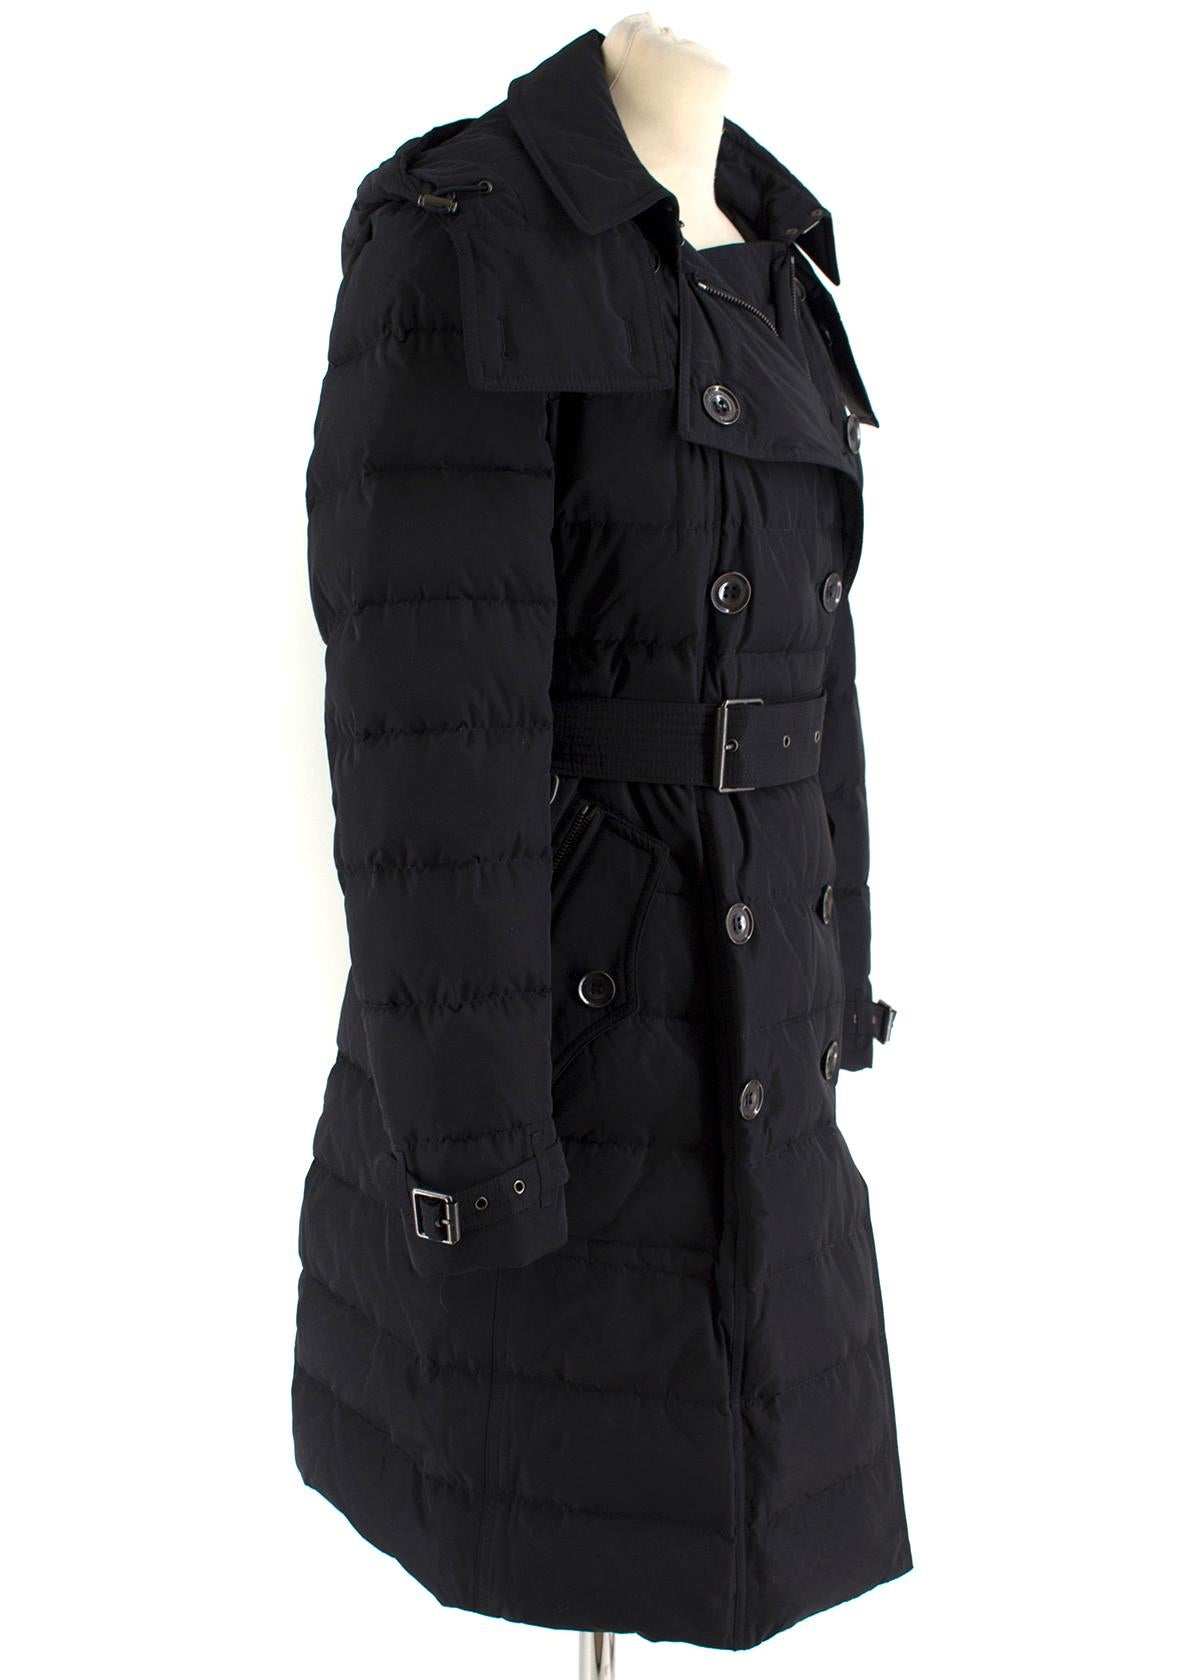 Burberry Detachable Hood Down-filled Puffer Coat

- Black, mid-weight puffer coat
- Down-filled
- Detachable hood
- Double-breasted zip and button fastening
- Front buttoned and zipped welt pockets
- Burberry's signature details: epaulettes,